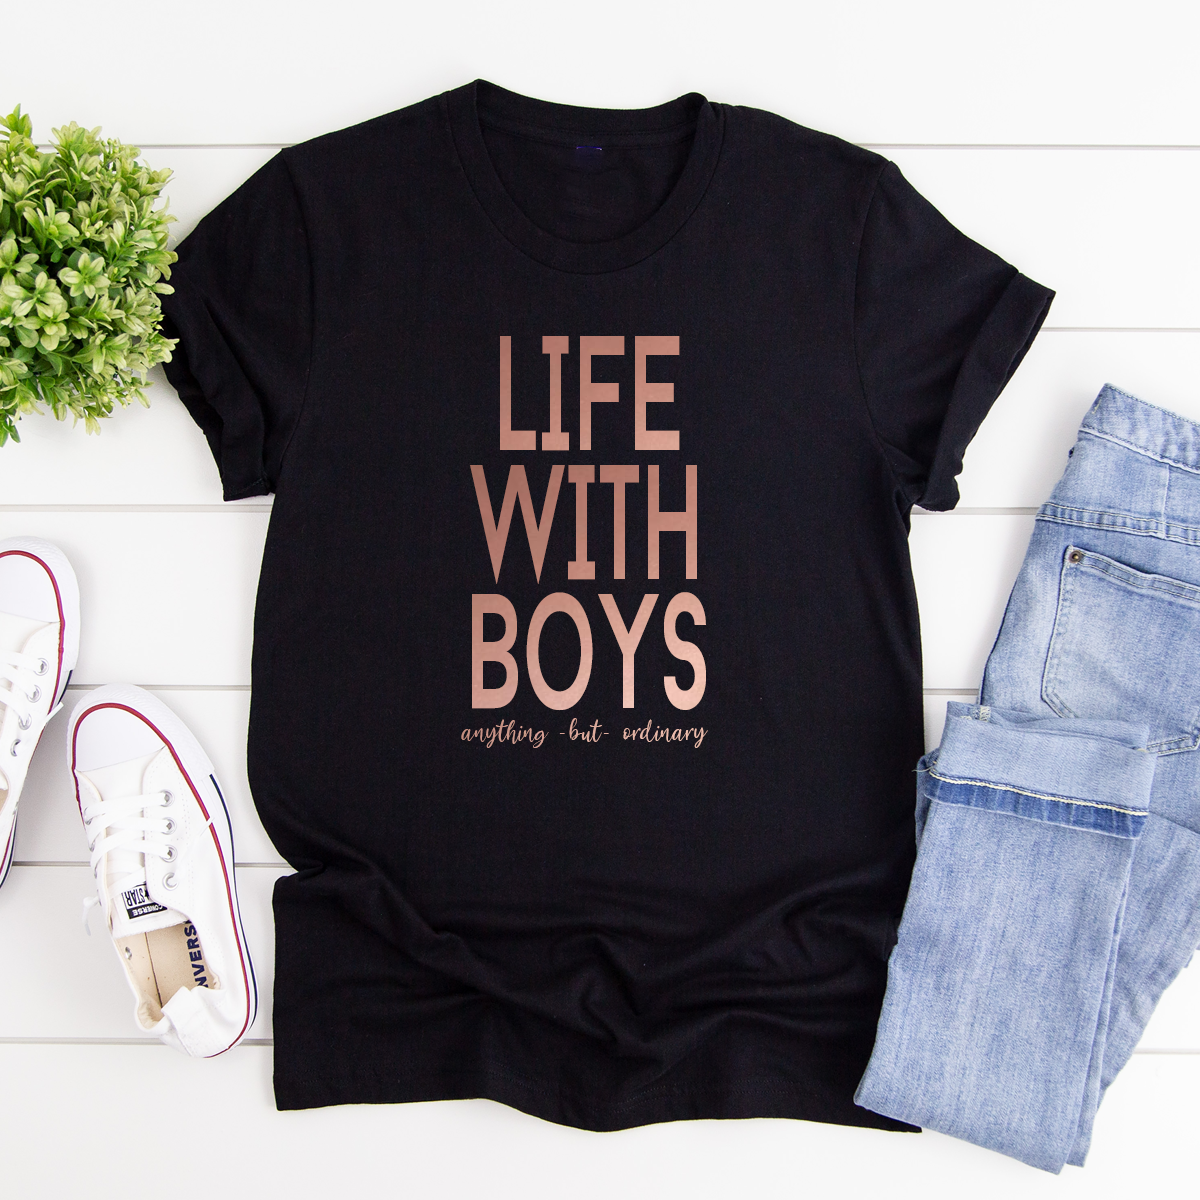 Life With Boys - anything but ordinary slogan - casual black t-shirt